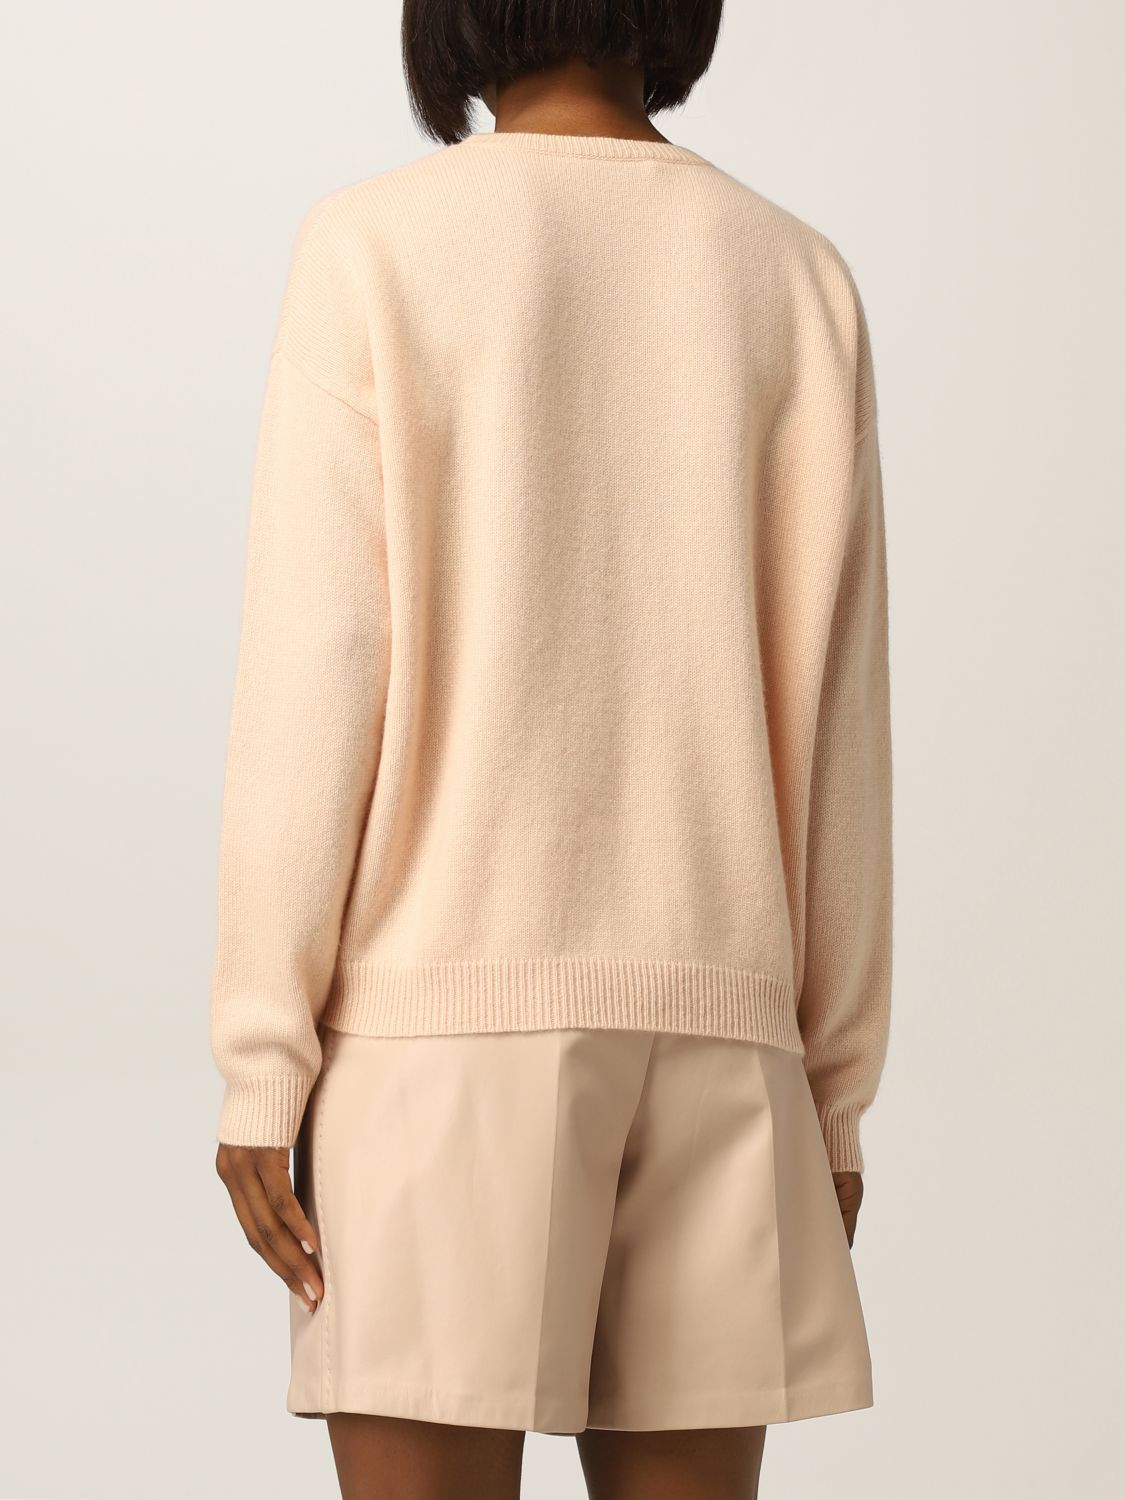 Natural Max Mara Cashmere Aster Sweater in Nude Womens Clothing Jumpers and knitwear Jumpers 